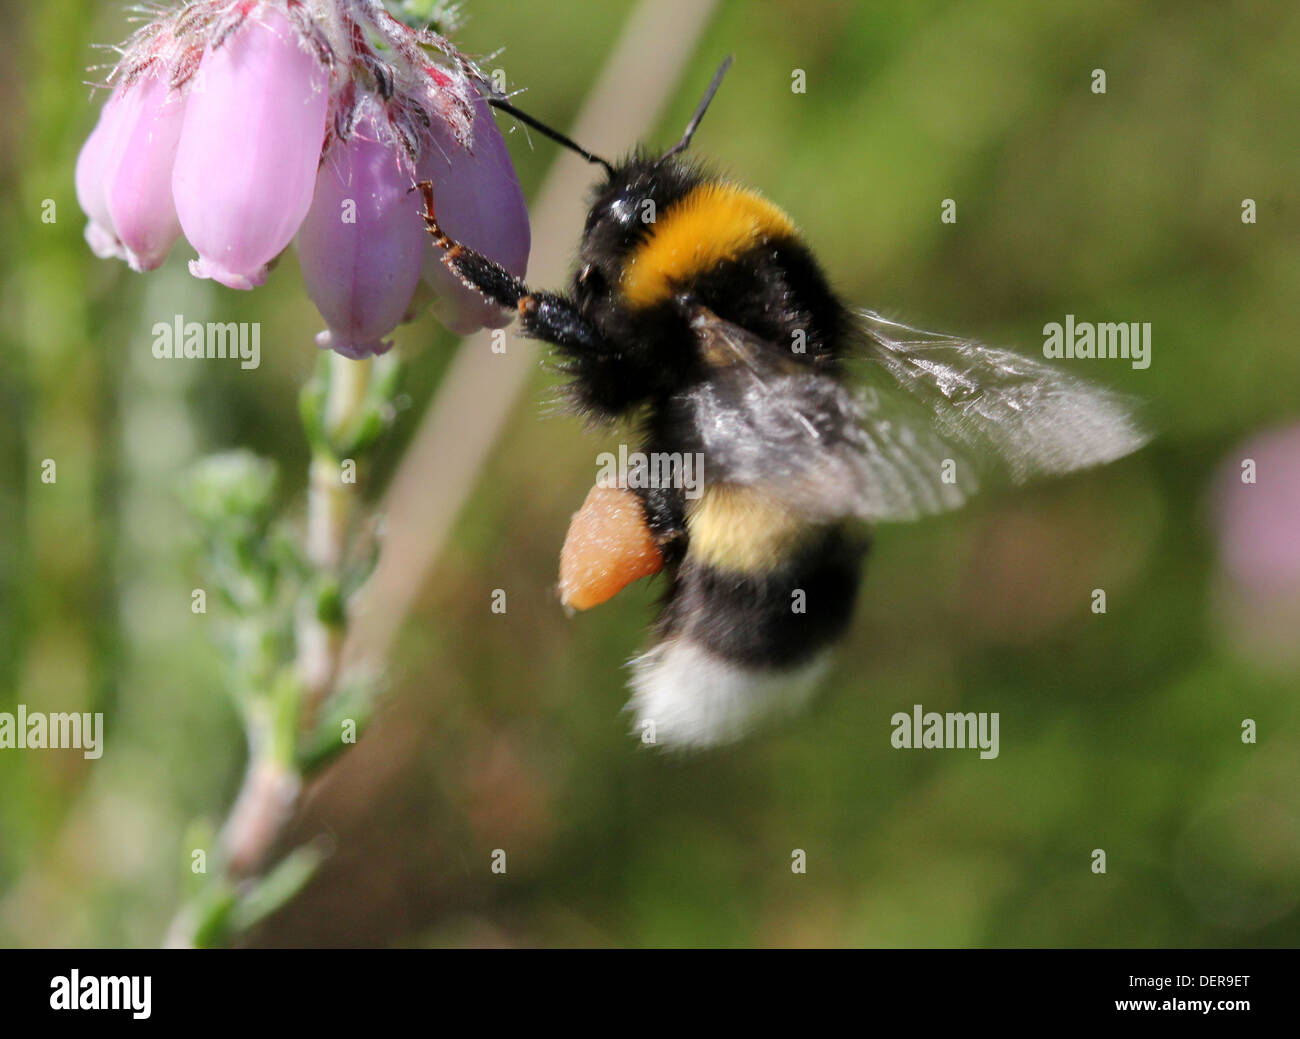 Large earth Bumble-bee or Buff-tailed bumblebee (Bombus terrestris) feeding  on a  flower while hovering in flight Stock Photo